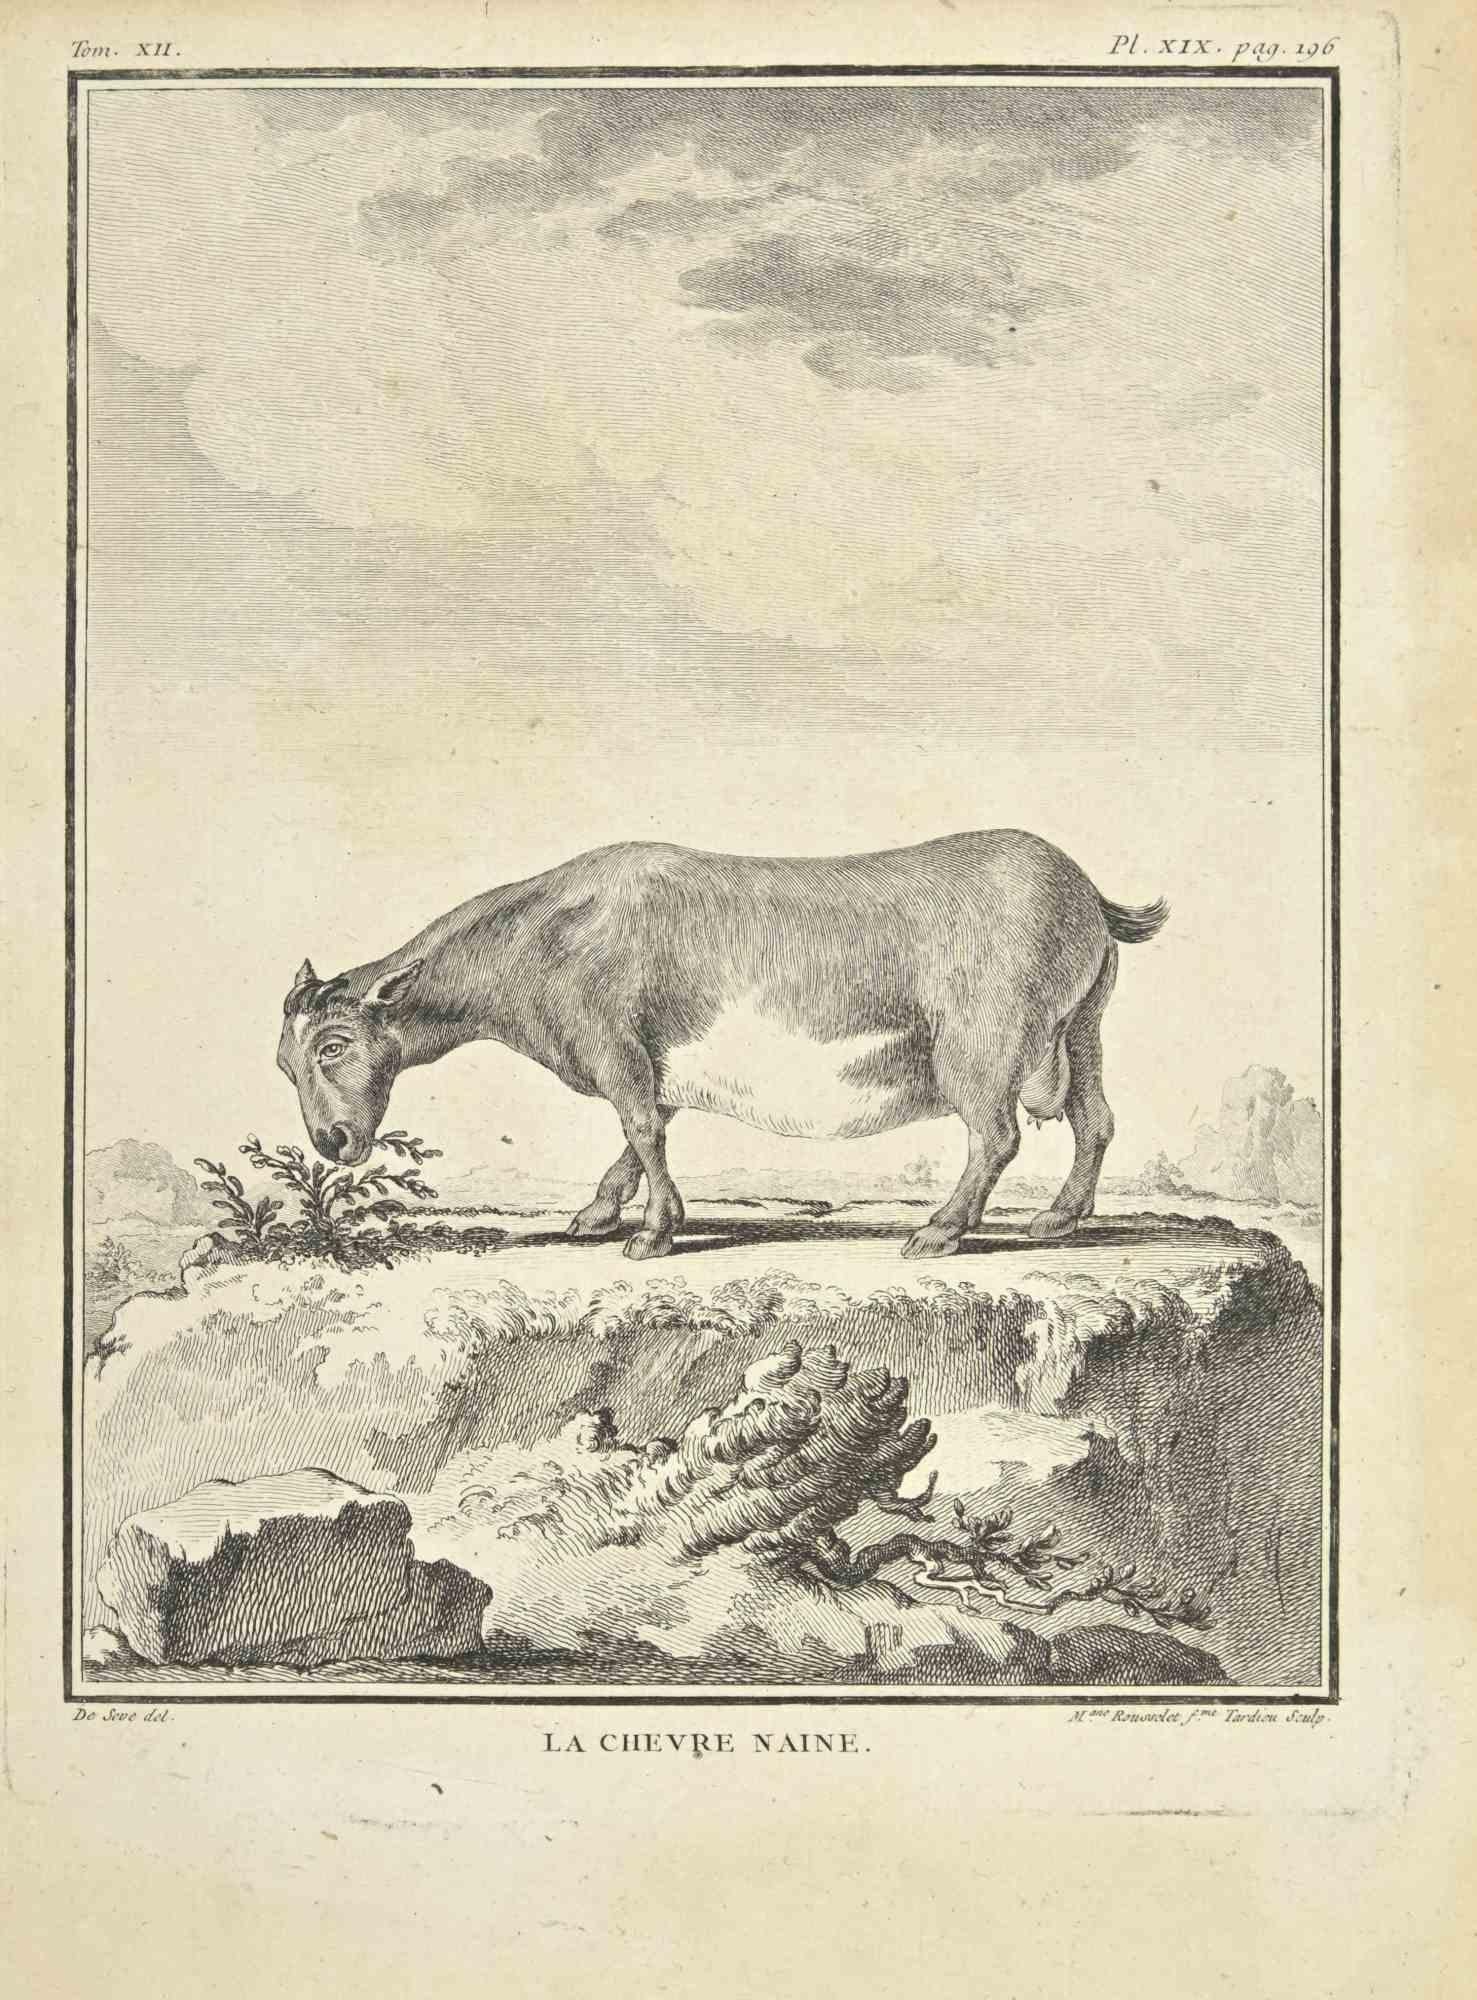 La Chevre Naine is an etching realized by Juste Madeline Rousselet in 1771.

It belongs to the suite "Histoire Naturelle de Buffon".

The Artist's signature is engraved lower right.

Good conditions with slight foxing.
